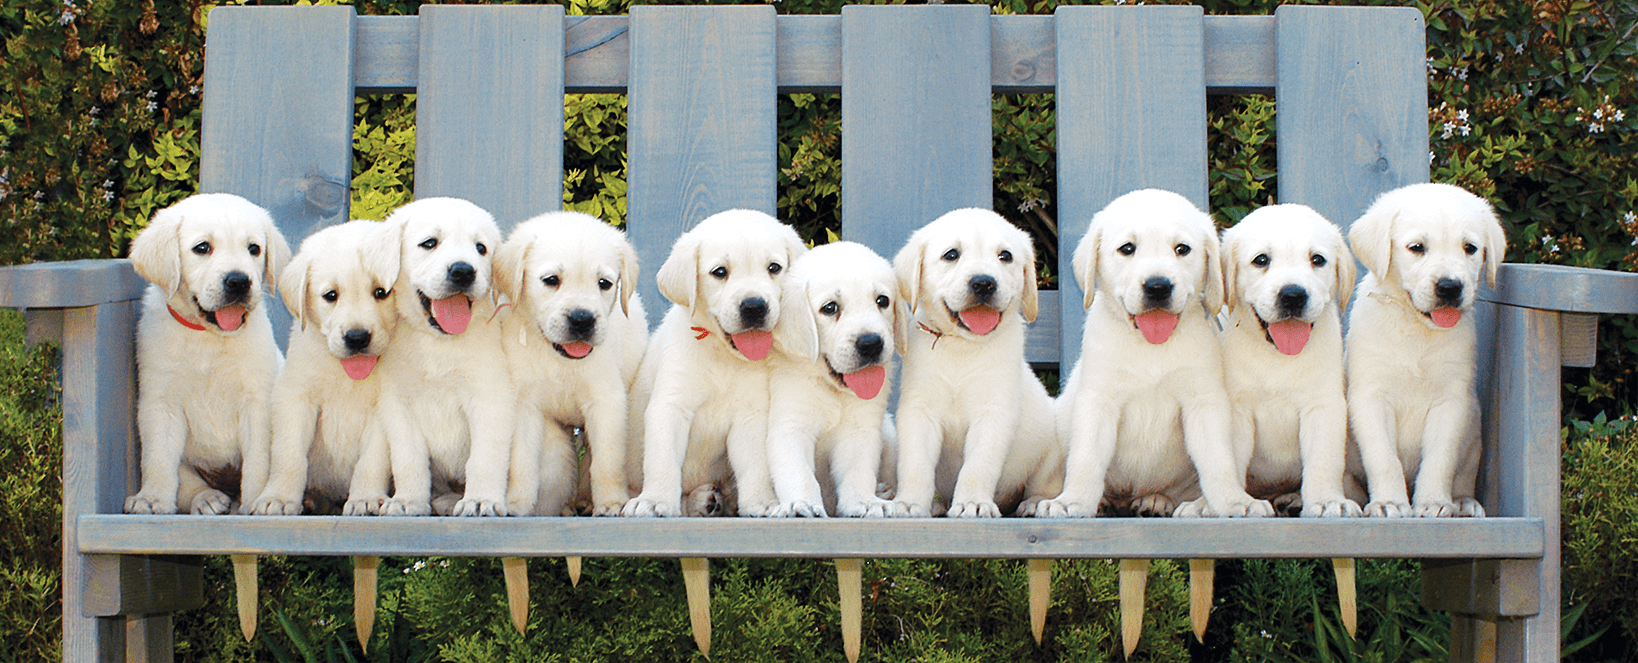 A row of puppies on a bench.